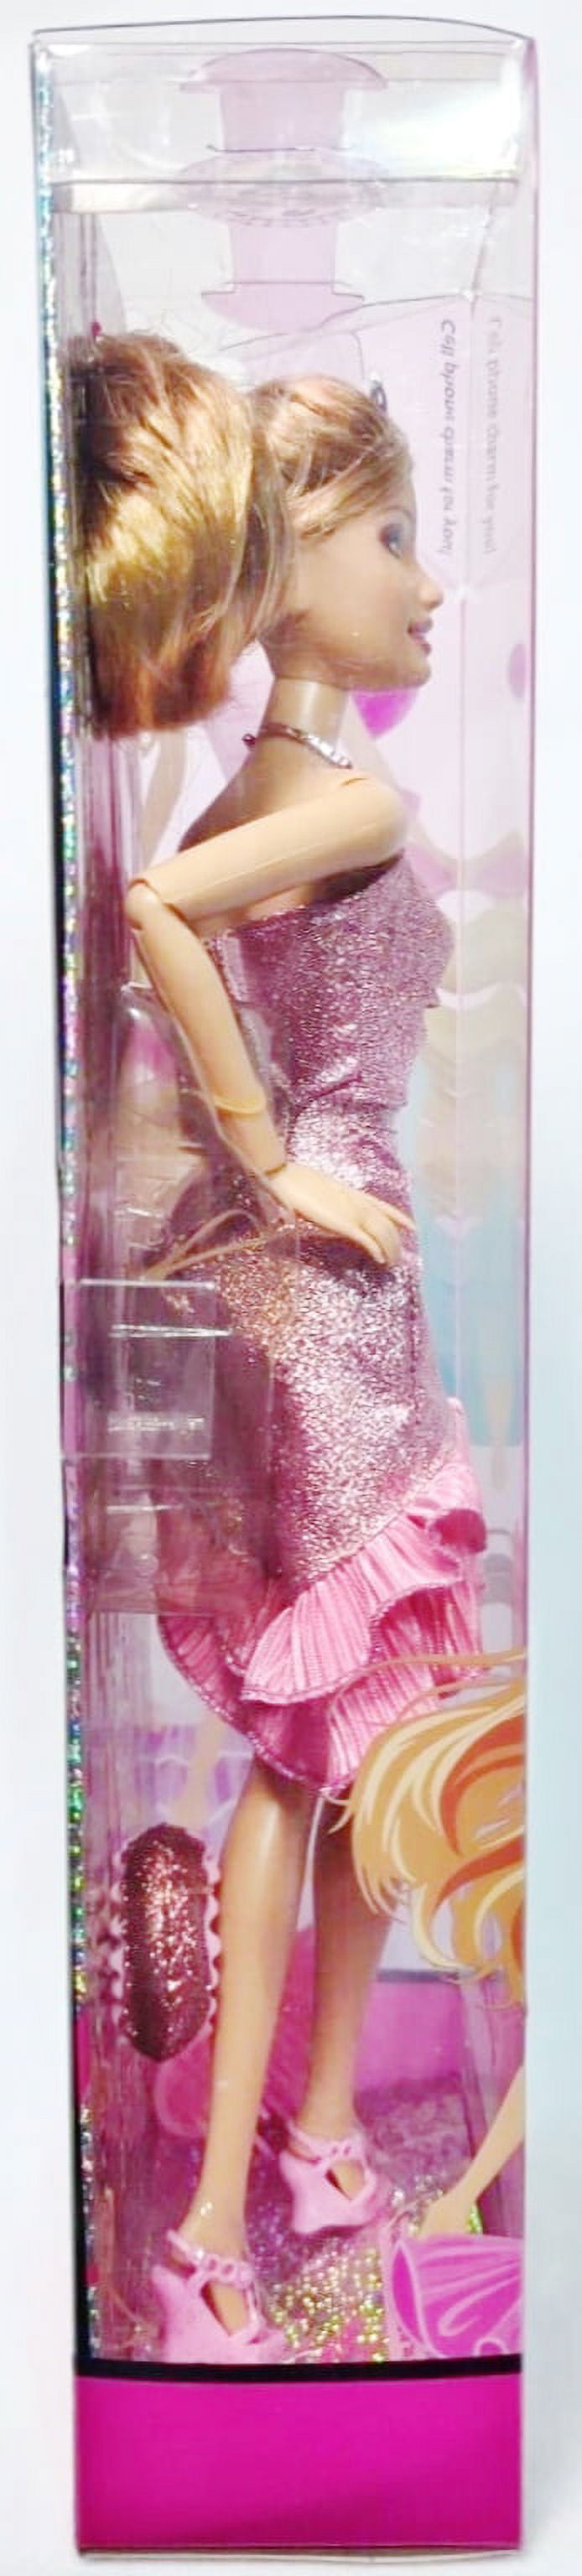 Barbie 2008 Fashion Fever 12 Inch Doll - Summer with Glamour Metallic Pink  Halter Party Dress, Purse, High Heel Shoes and Hairbrush Plus Cell Phone